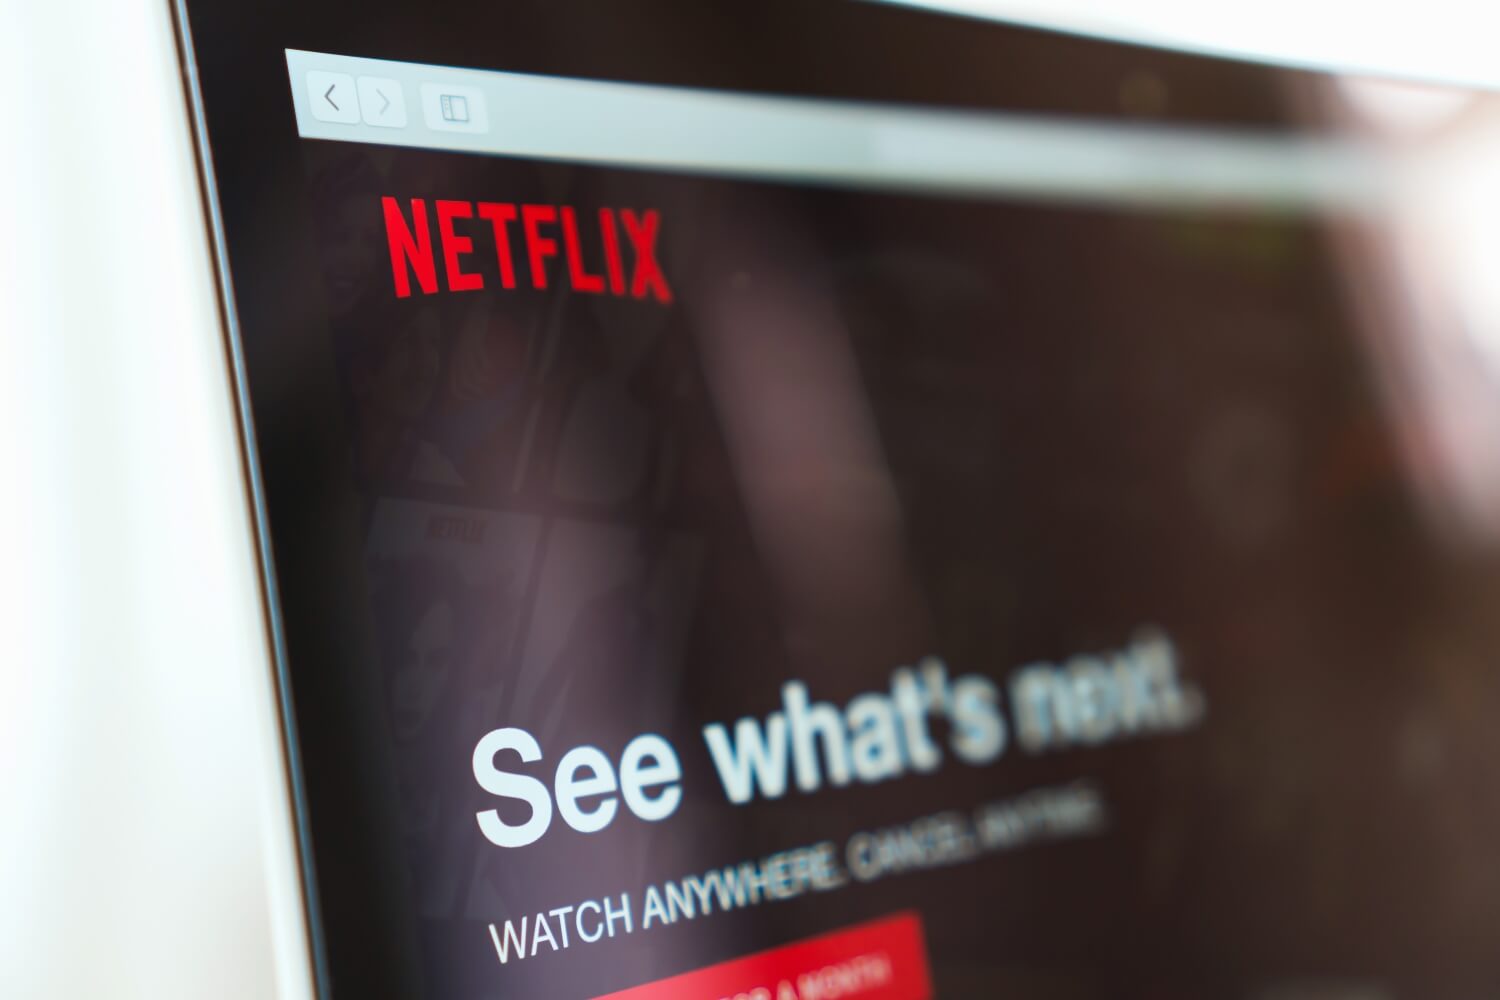 Netflix is restoring streaming quality in Europe as stay-at-home restrictions ease